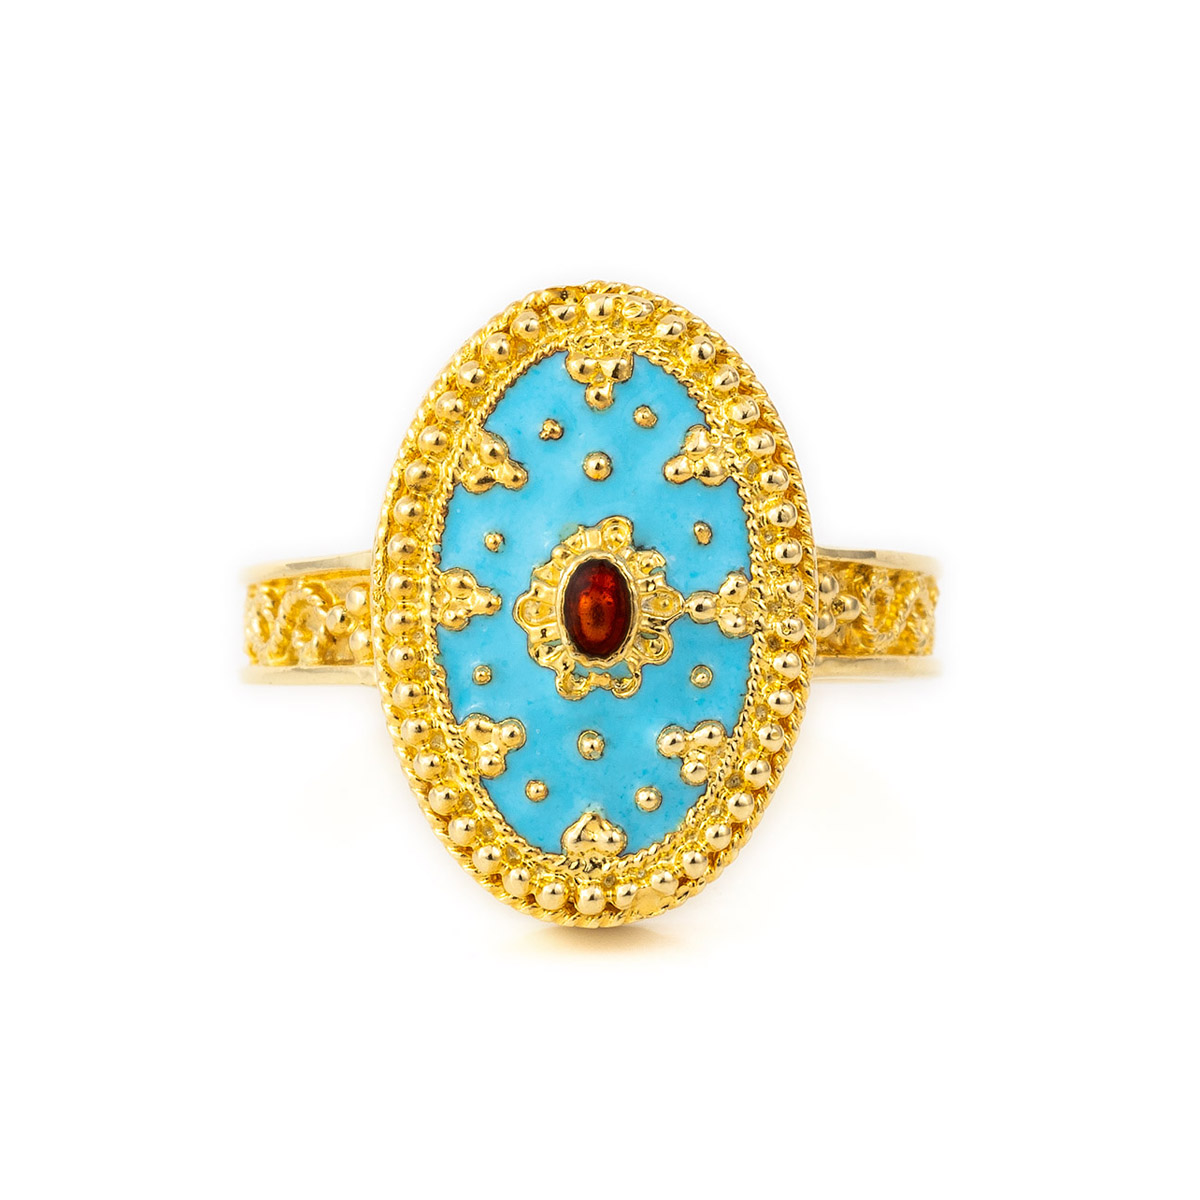 Oval Sonoran Gold Turquoise Cocktail Ring Size 7.5 - Dillon & Nattarika